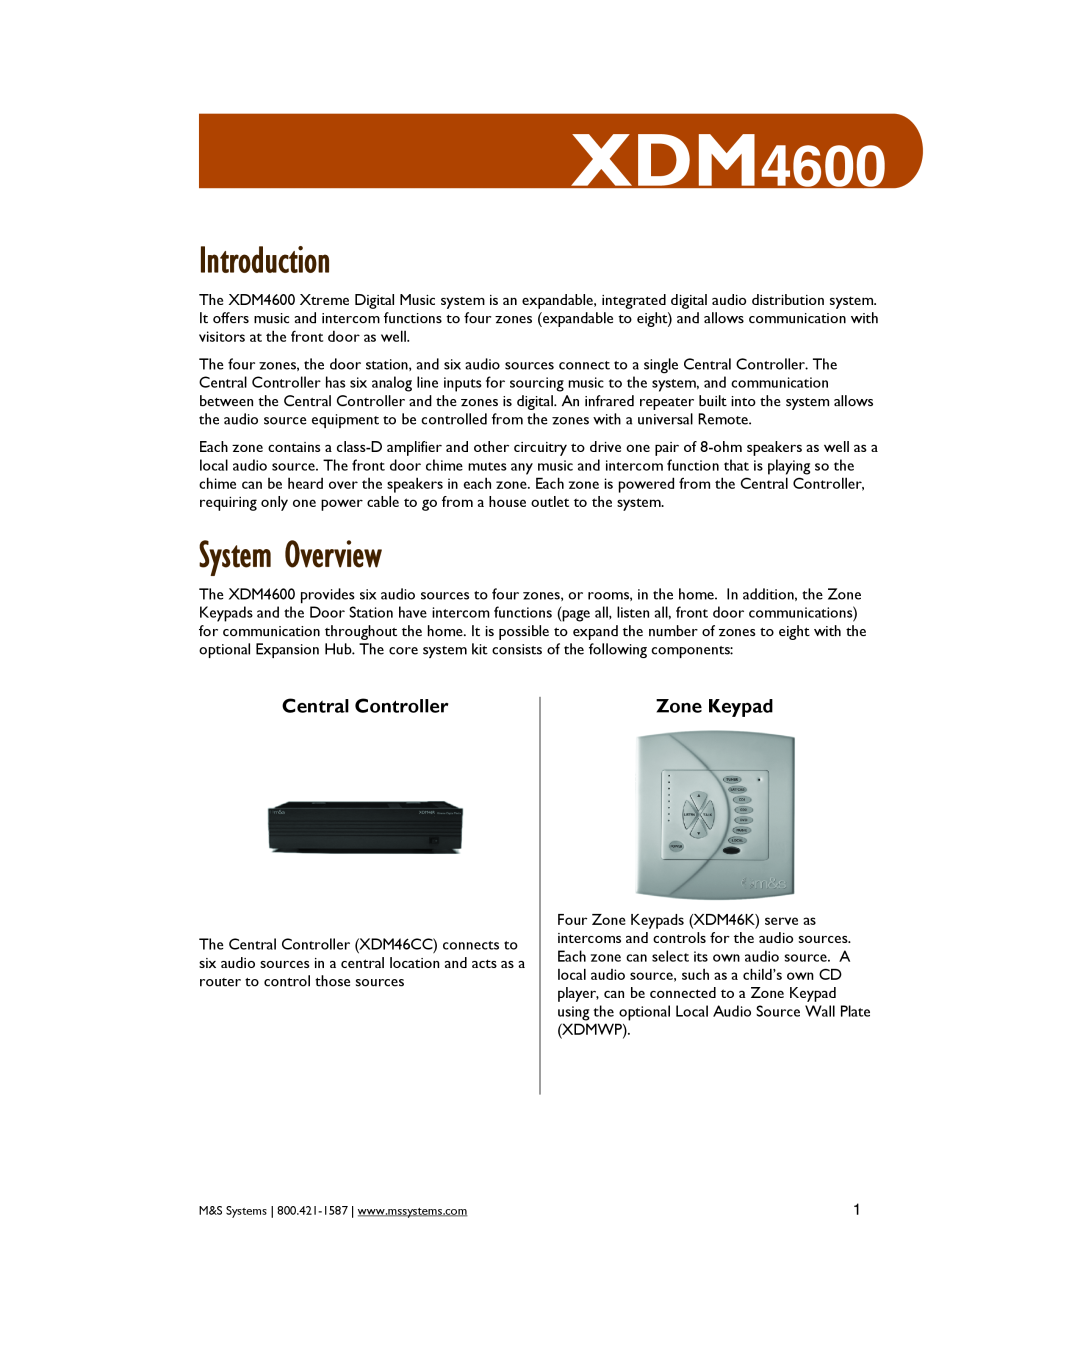 M&S Systems XDM4600 owner manual Introduction, System Overview, Central Controller, Zone Keypad 